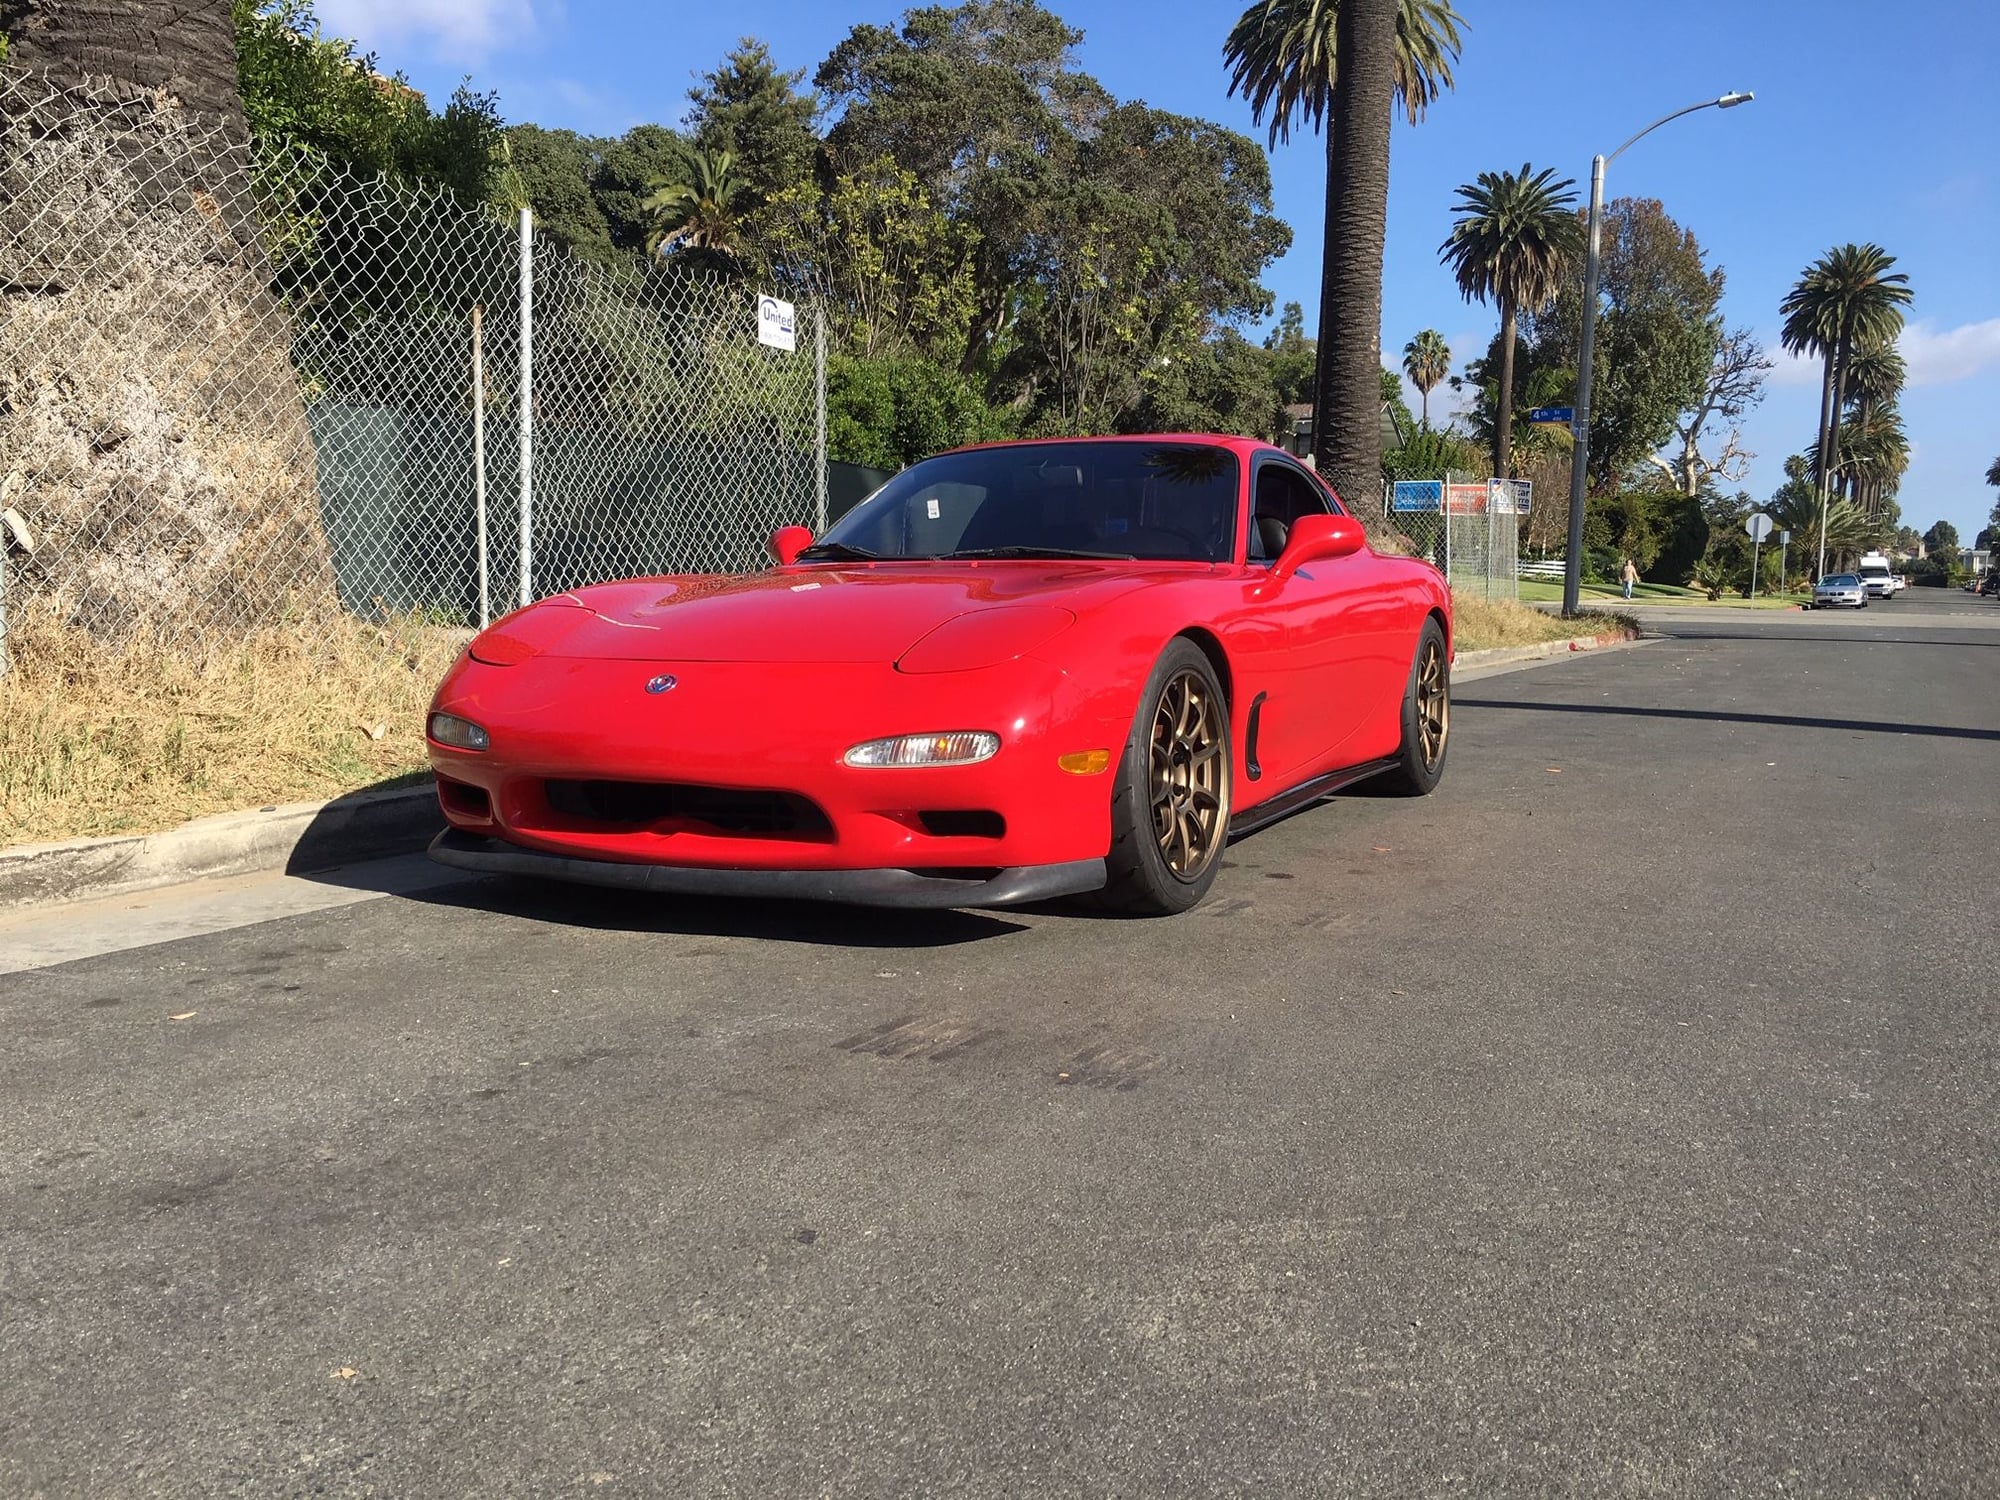 1993 Mazda RX-7 - 1993 RX7 - Base Model Vintage Red Manual - Los Angeles, CA - Used - VIN JM1FD3313P0206640 - 97,000 Miles - Other - 2WD - Manual - Coupe - Red - Los Angeles, CA 91302, United States